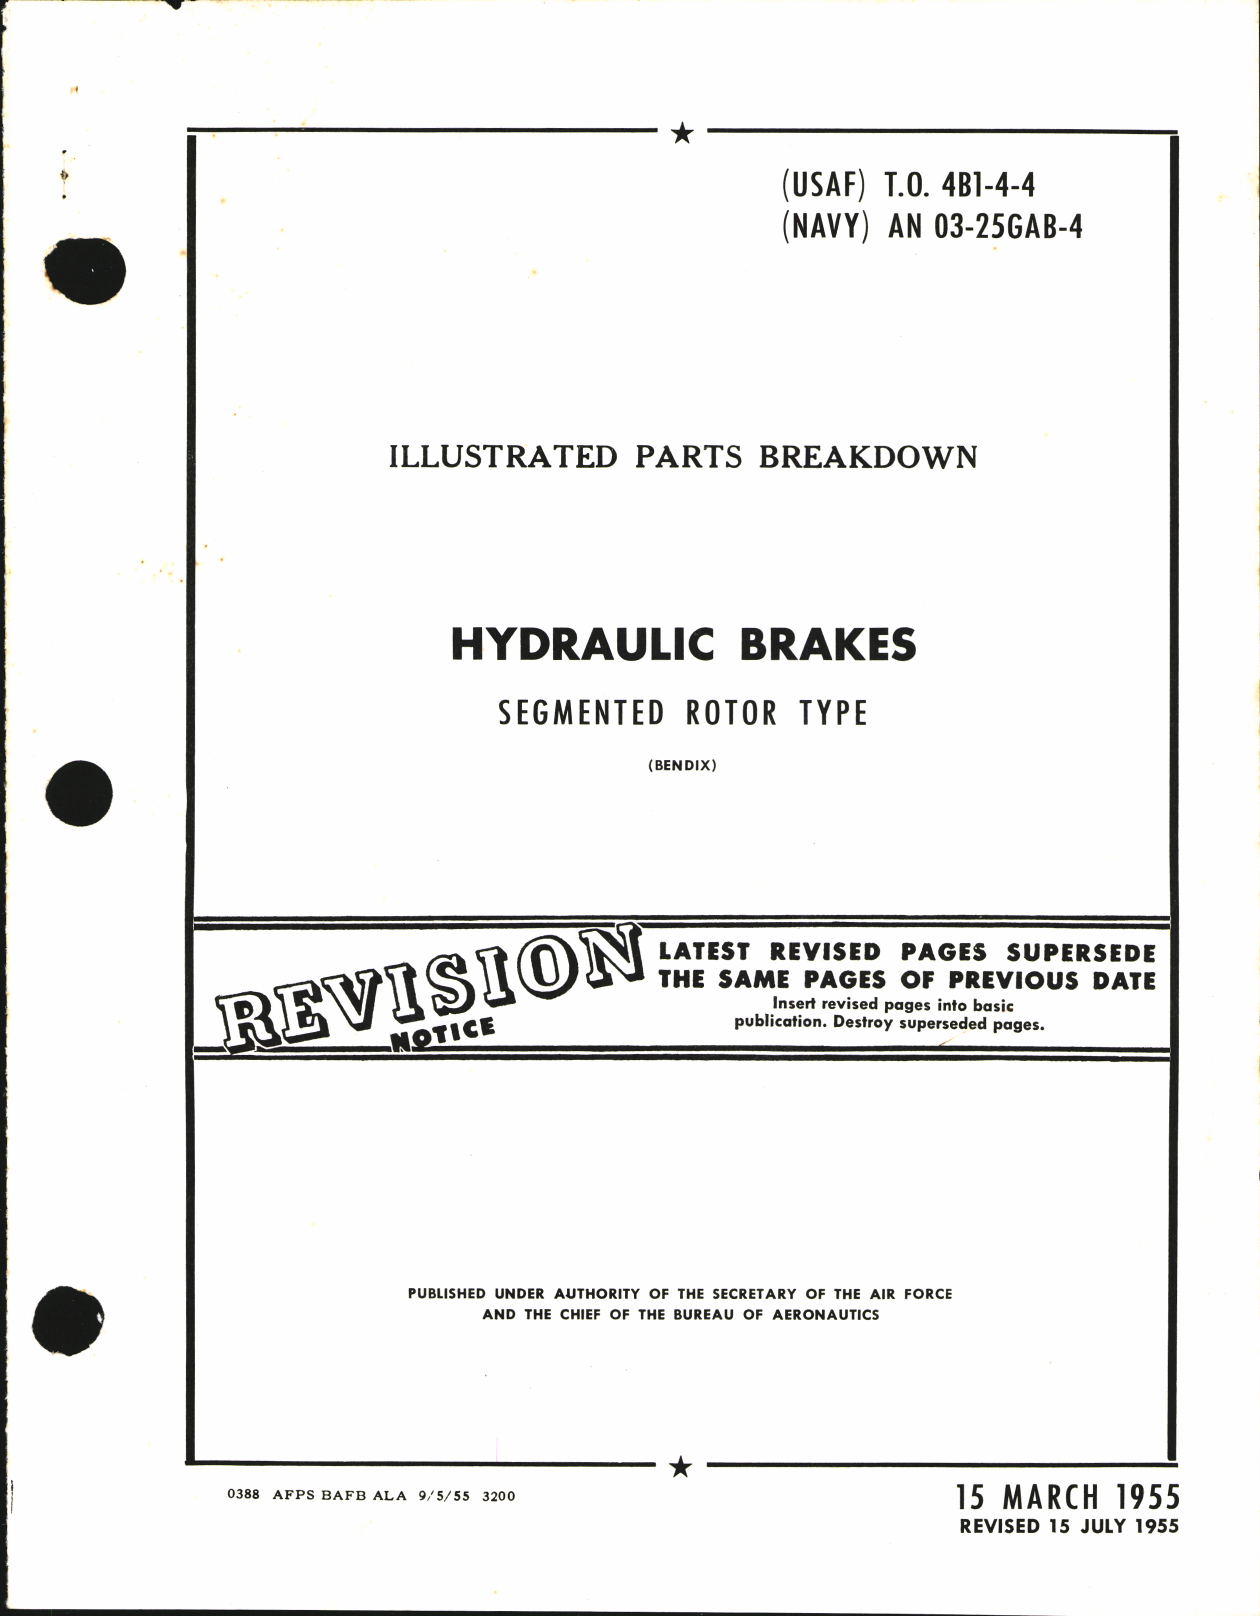 Sample page 1 from AirCorps Library document: Illustrated Parts Breakdown for Hydraulic Brakes Segmented Rotor Type